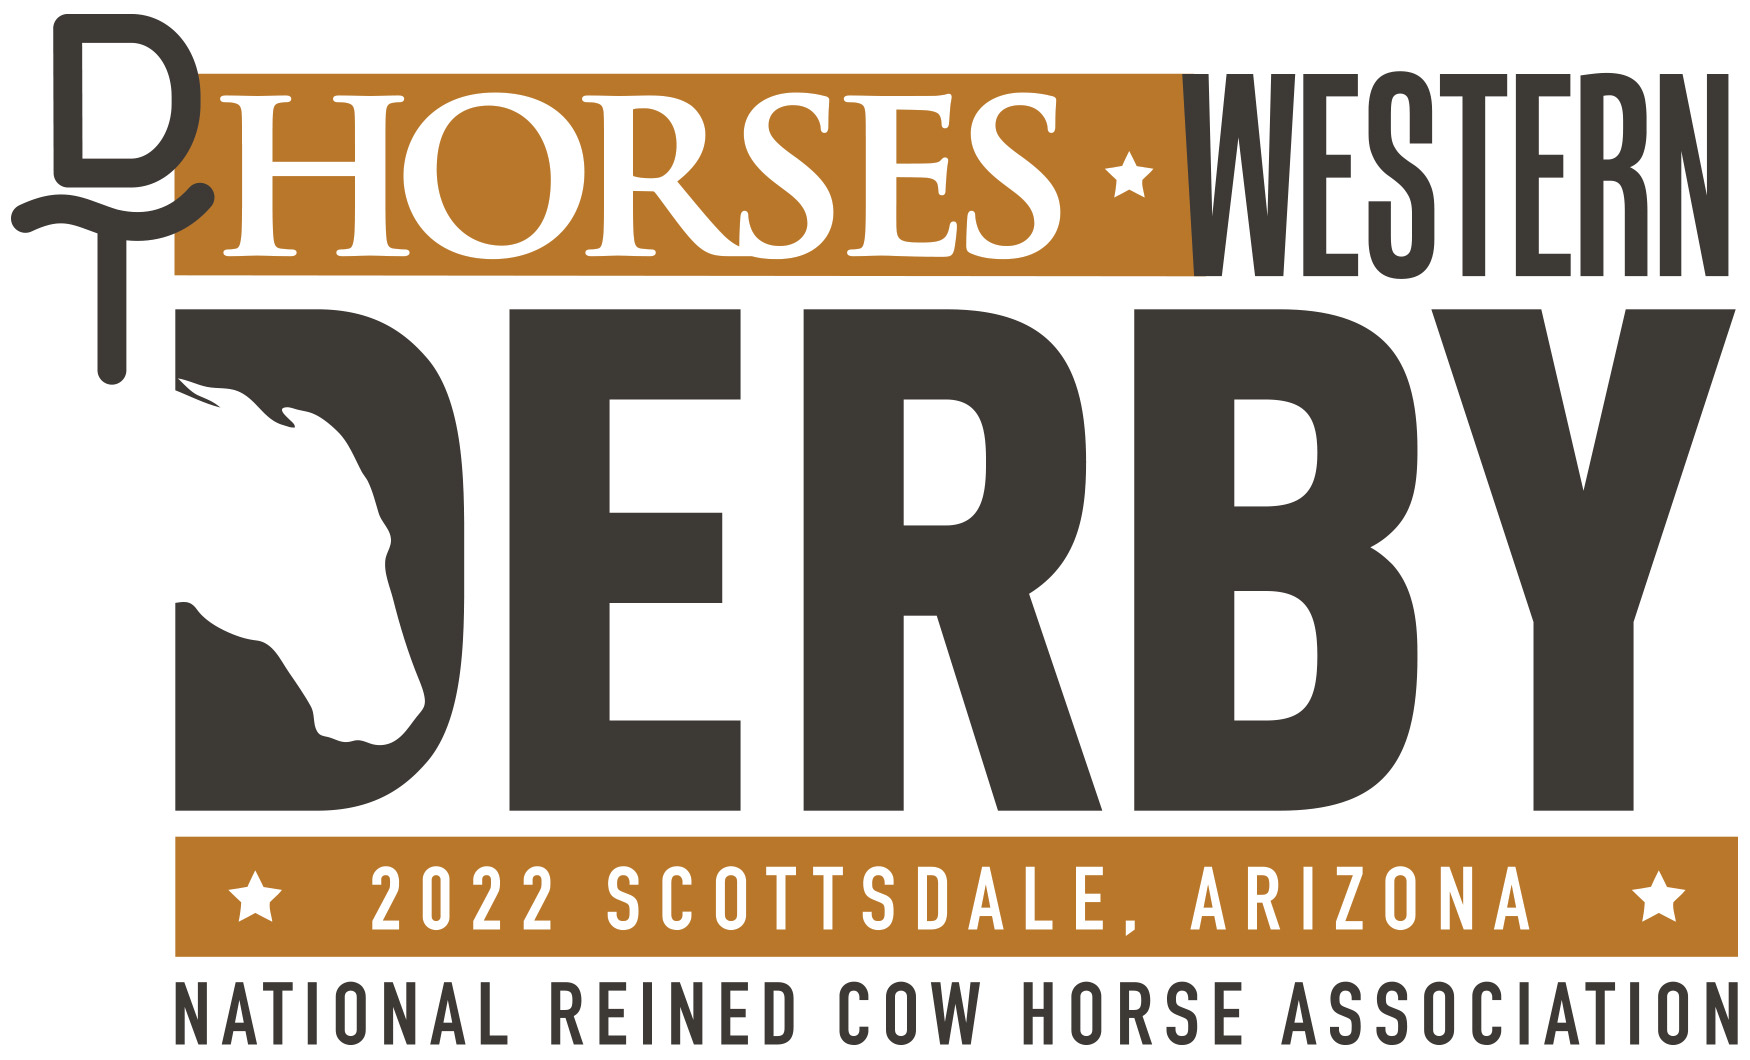 THE LARGEST NRCHA DT HORSES WESTERN DERBY CONCLUDED IN ARIZONA